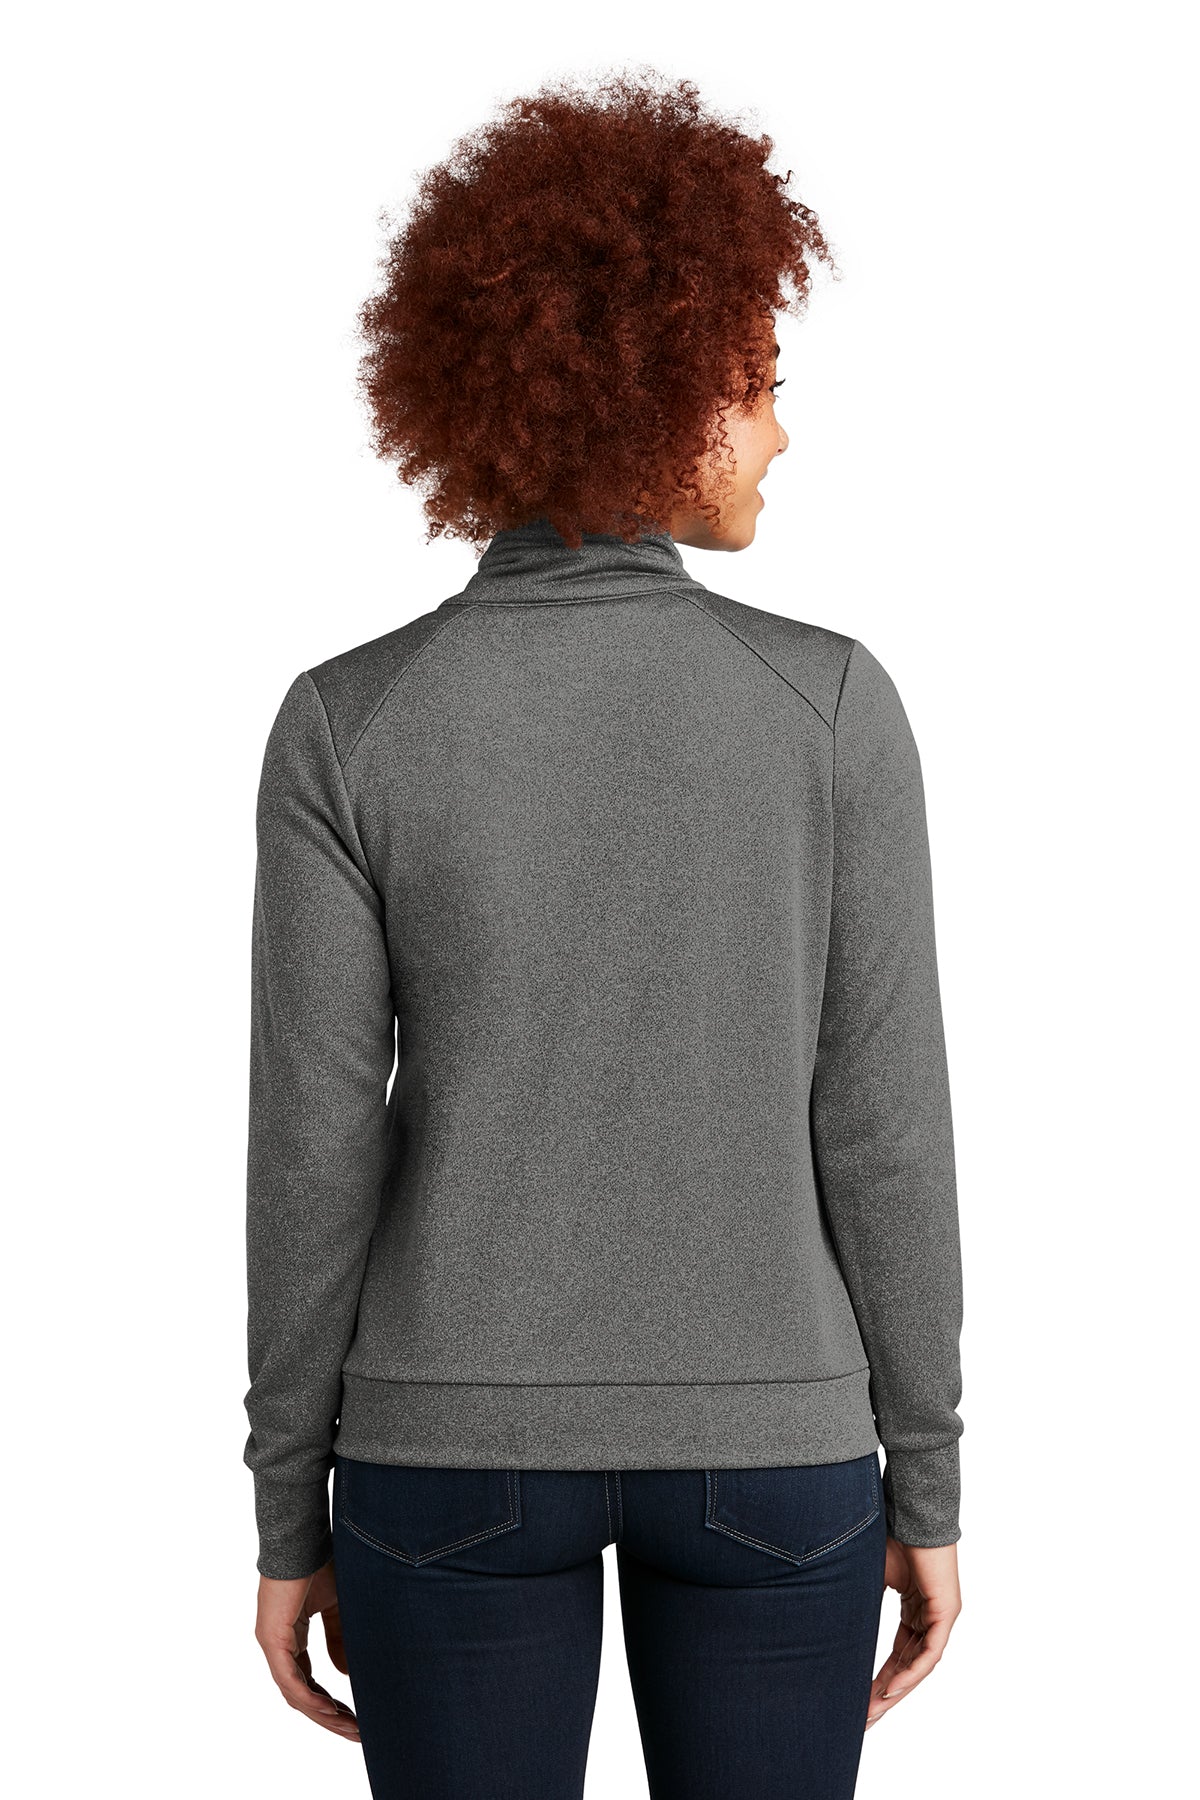 New Era Ladies Terry Zip Jacket, Graphite Heather [GuidePoint Security]